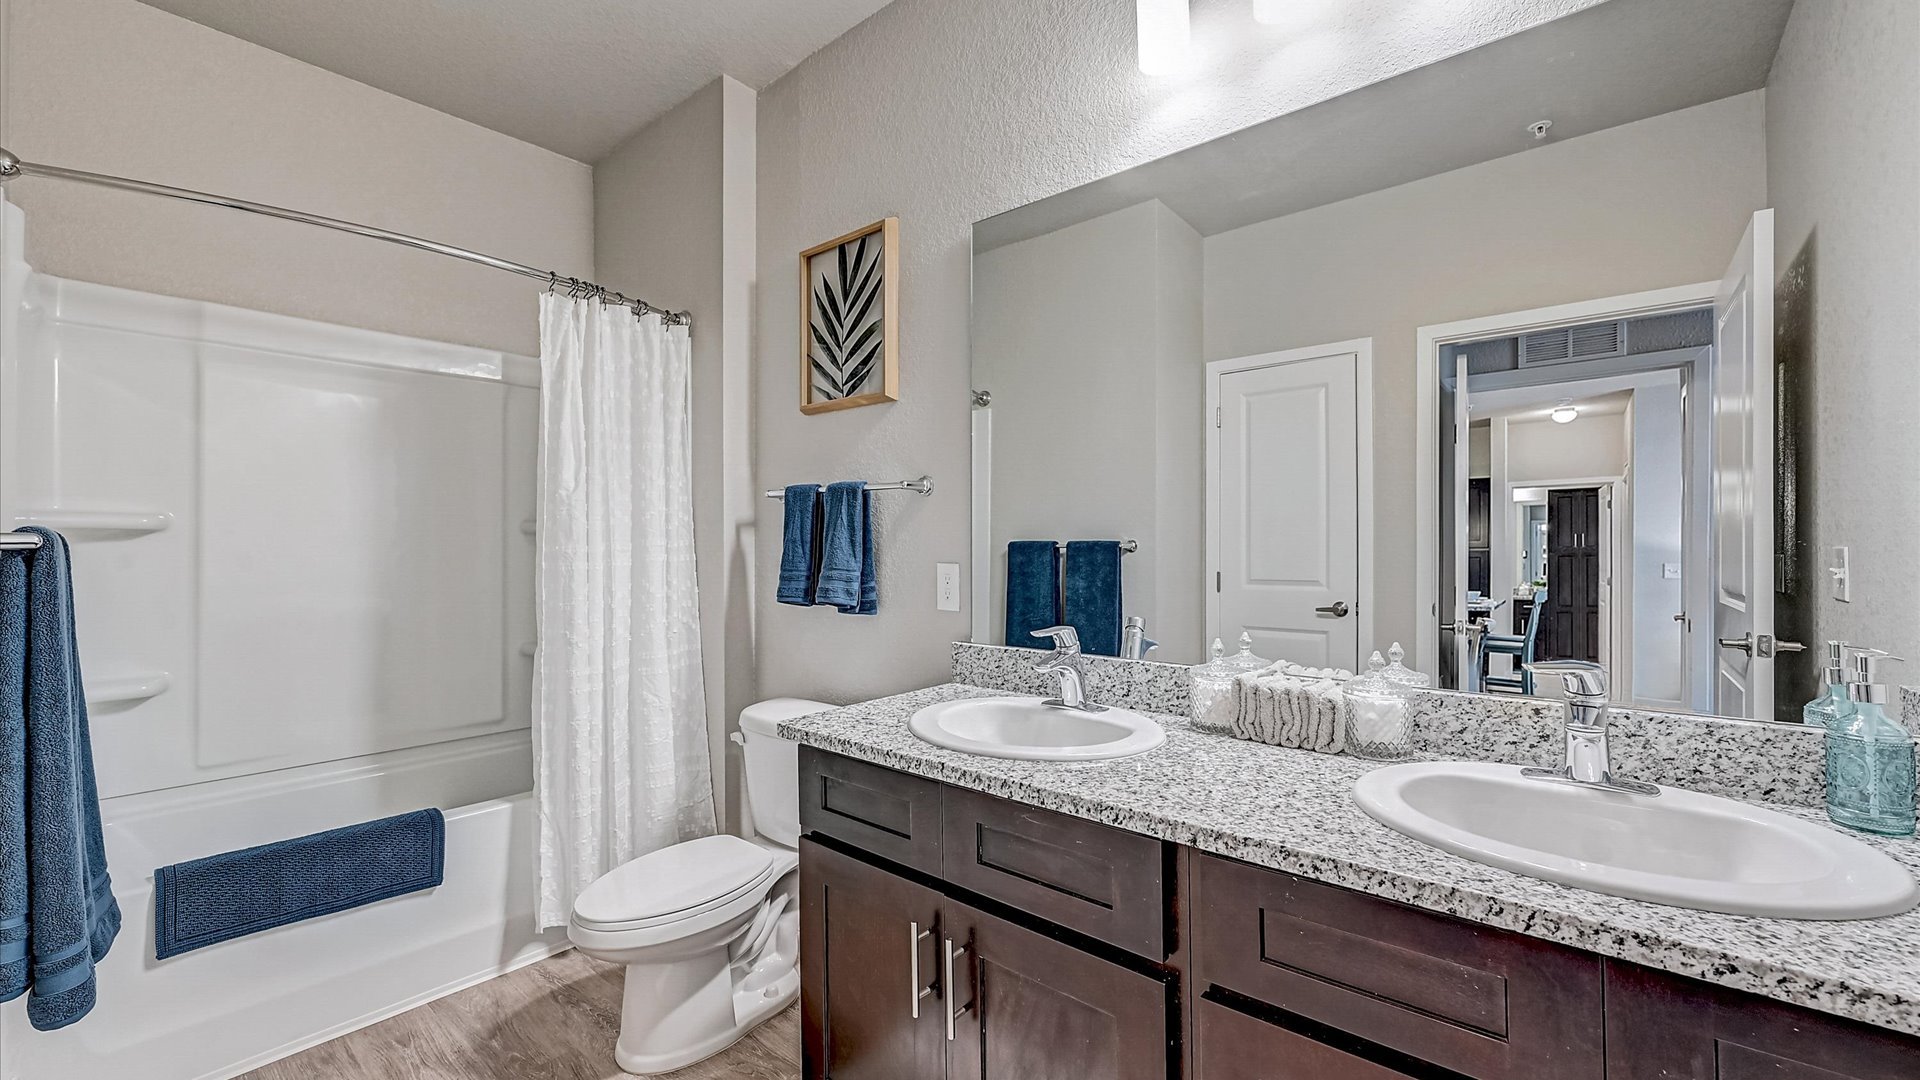 Spacious bathroom with garden tub, granite counters, mirror and expresso cabinets Springs at Flagler Center Apartments in Jacksonville, FL